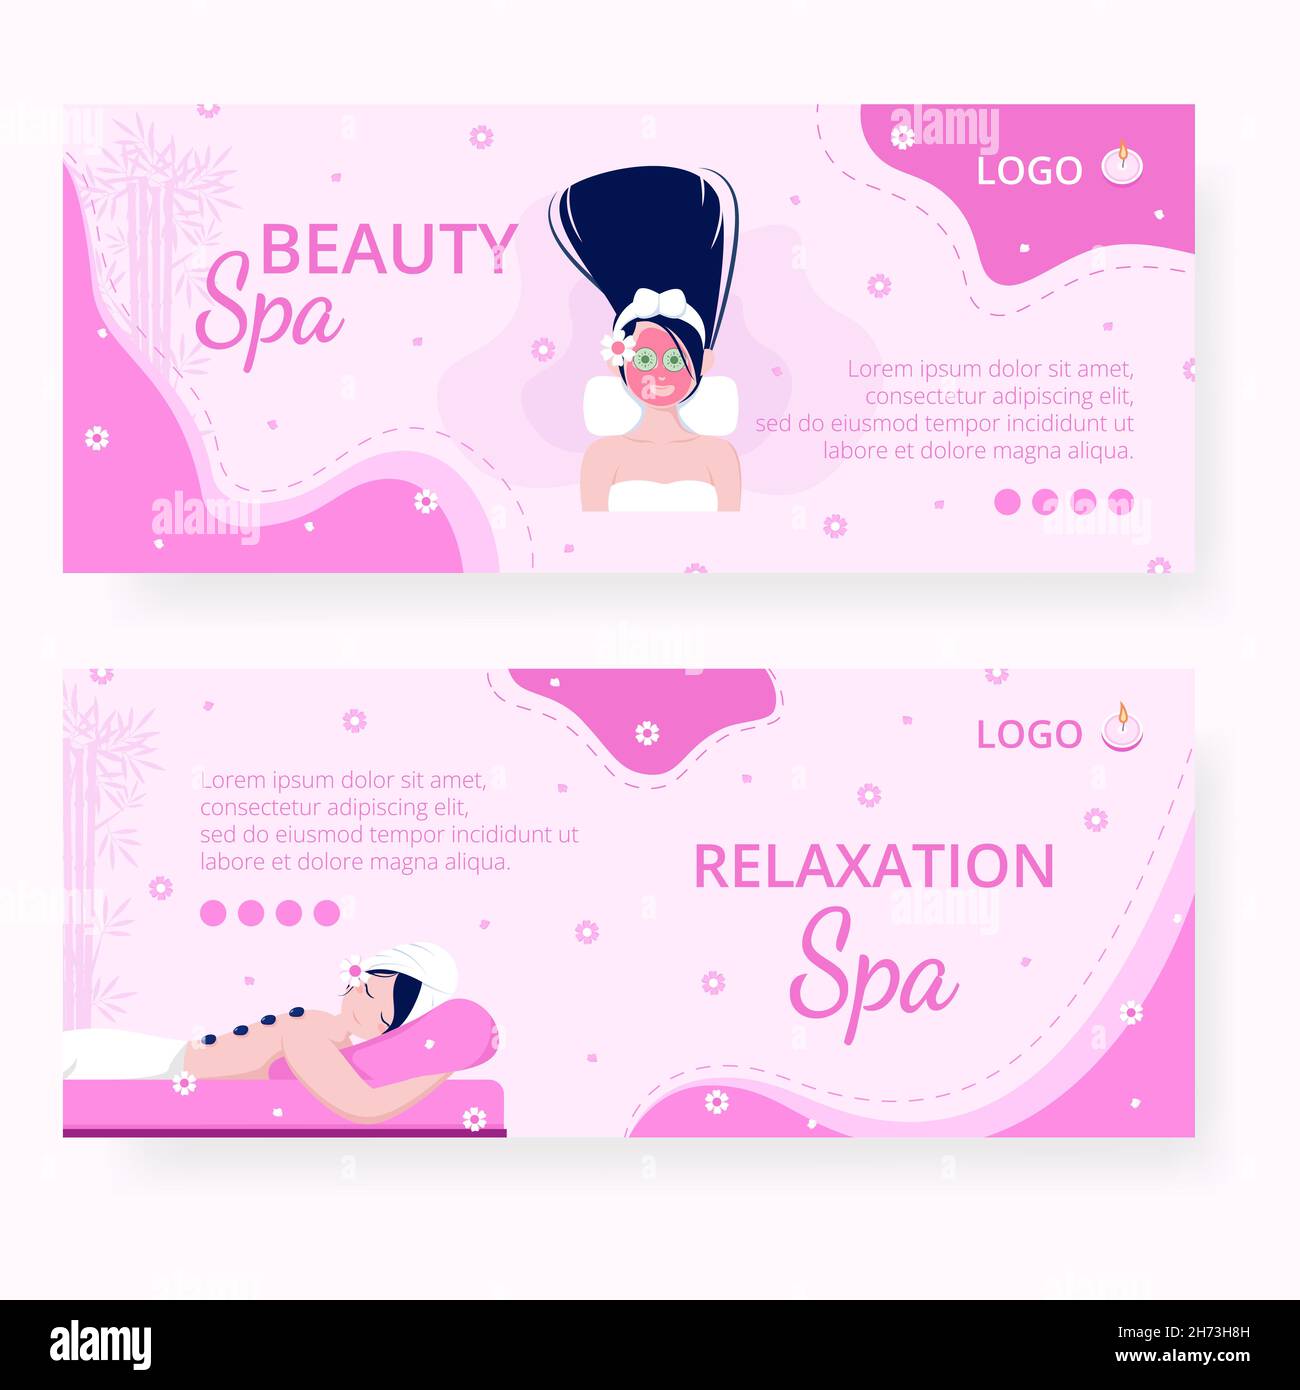 Beauty Spa and Yoga Banner Editable of Square Background Suitable for Social Media, Feed, Card, Greetings, Print and Web Internet Ads Stock Vector